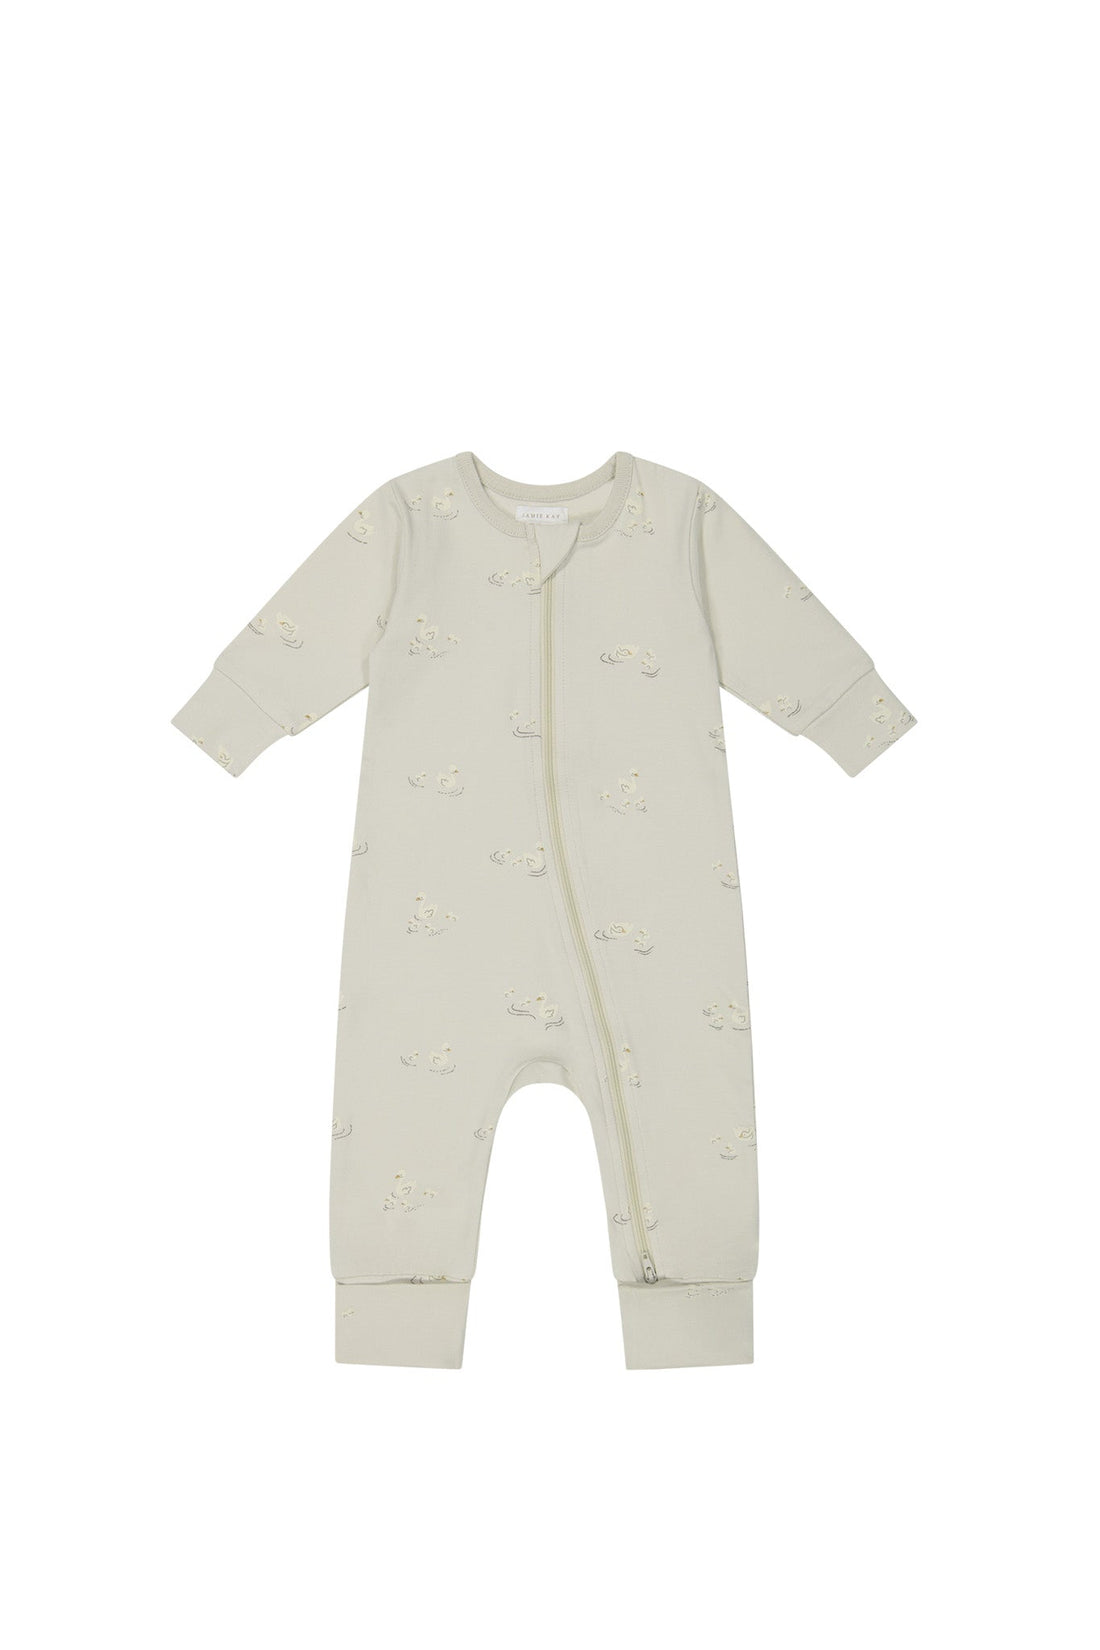 Organic Cotton Gracelyn Onepiece - Ducks In A Row Seed Silver Lining Childrens Onepiece from Jamie Kay USA